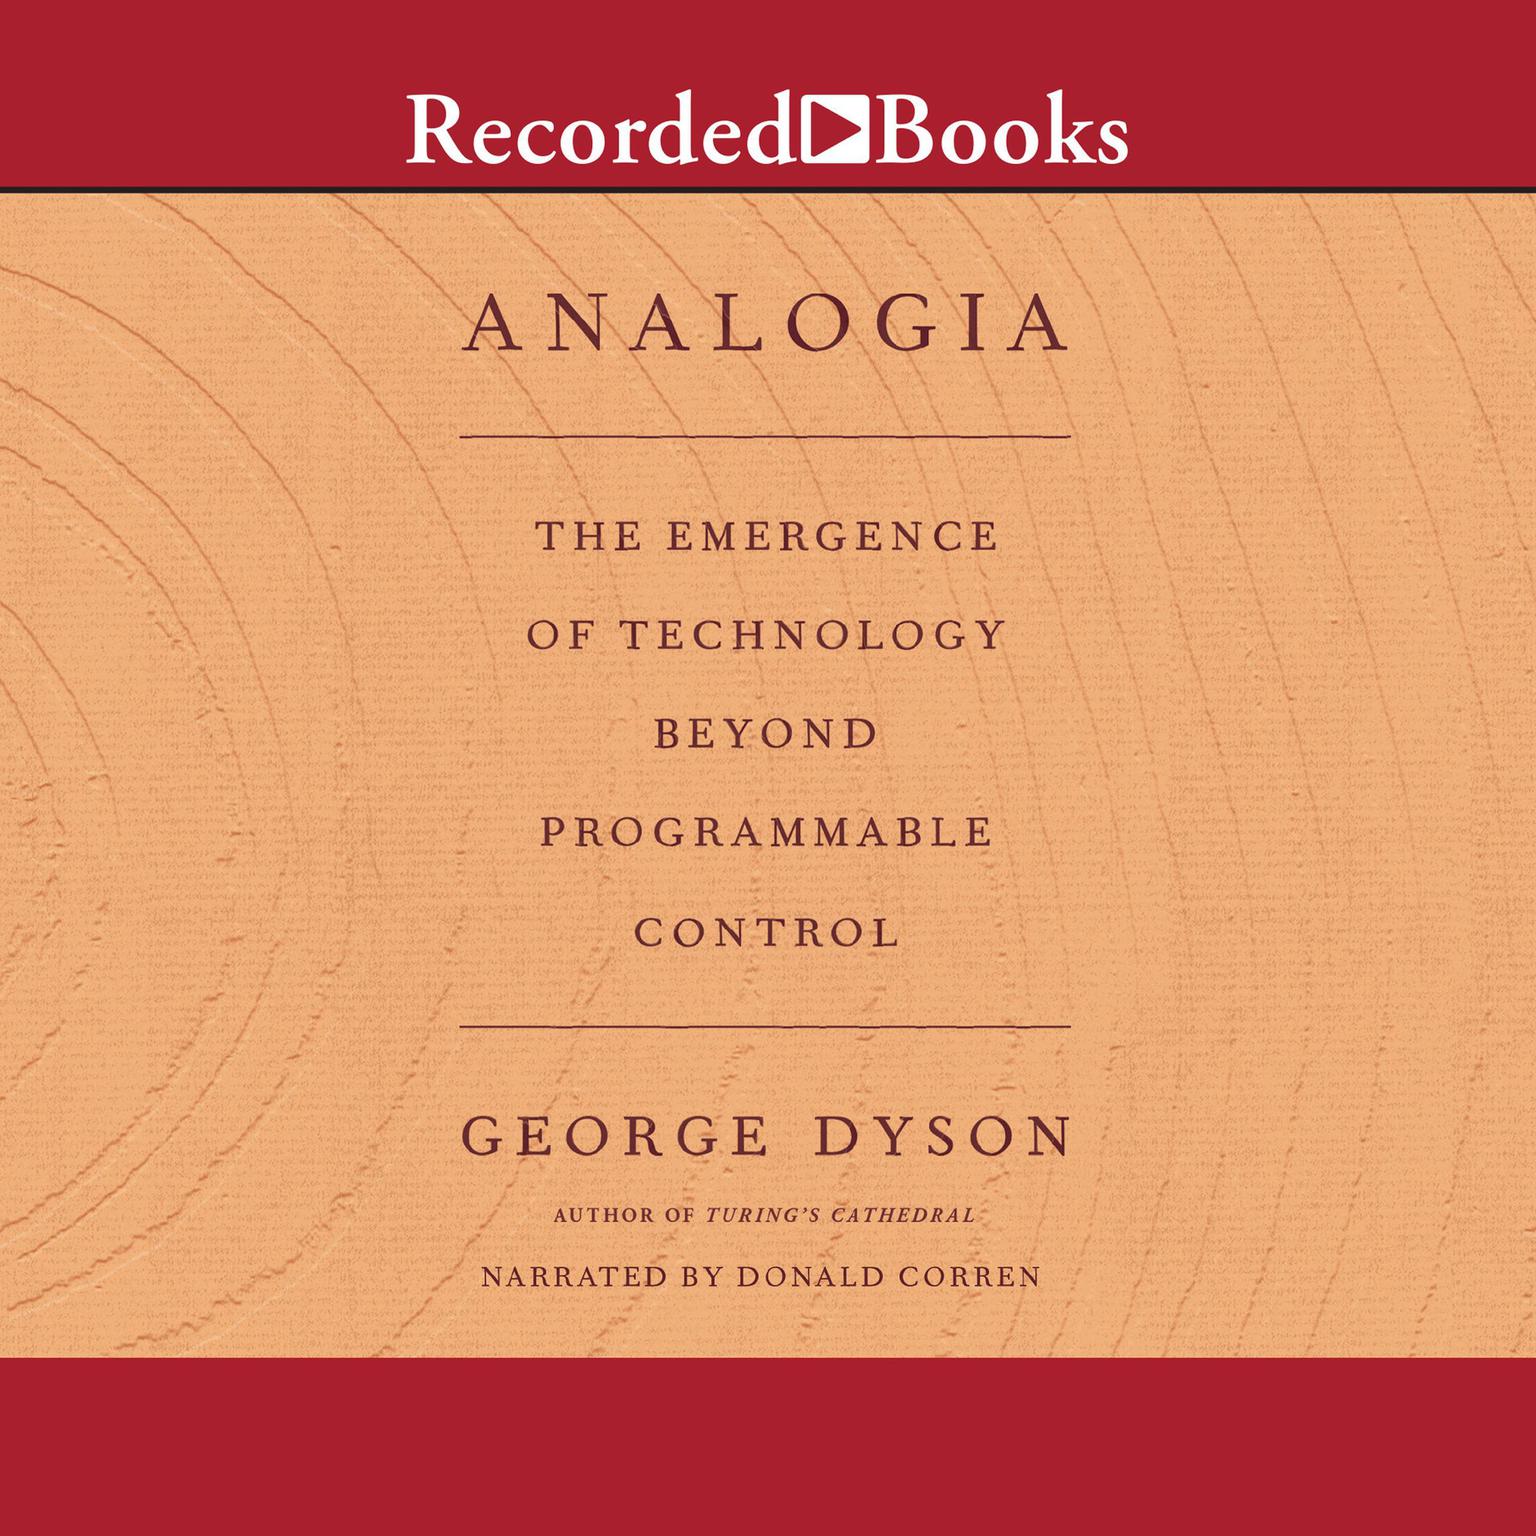 Analogia: The Emergence of Technology Beyond Programmable Control Audiobook, by George Dyson